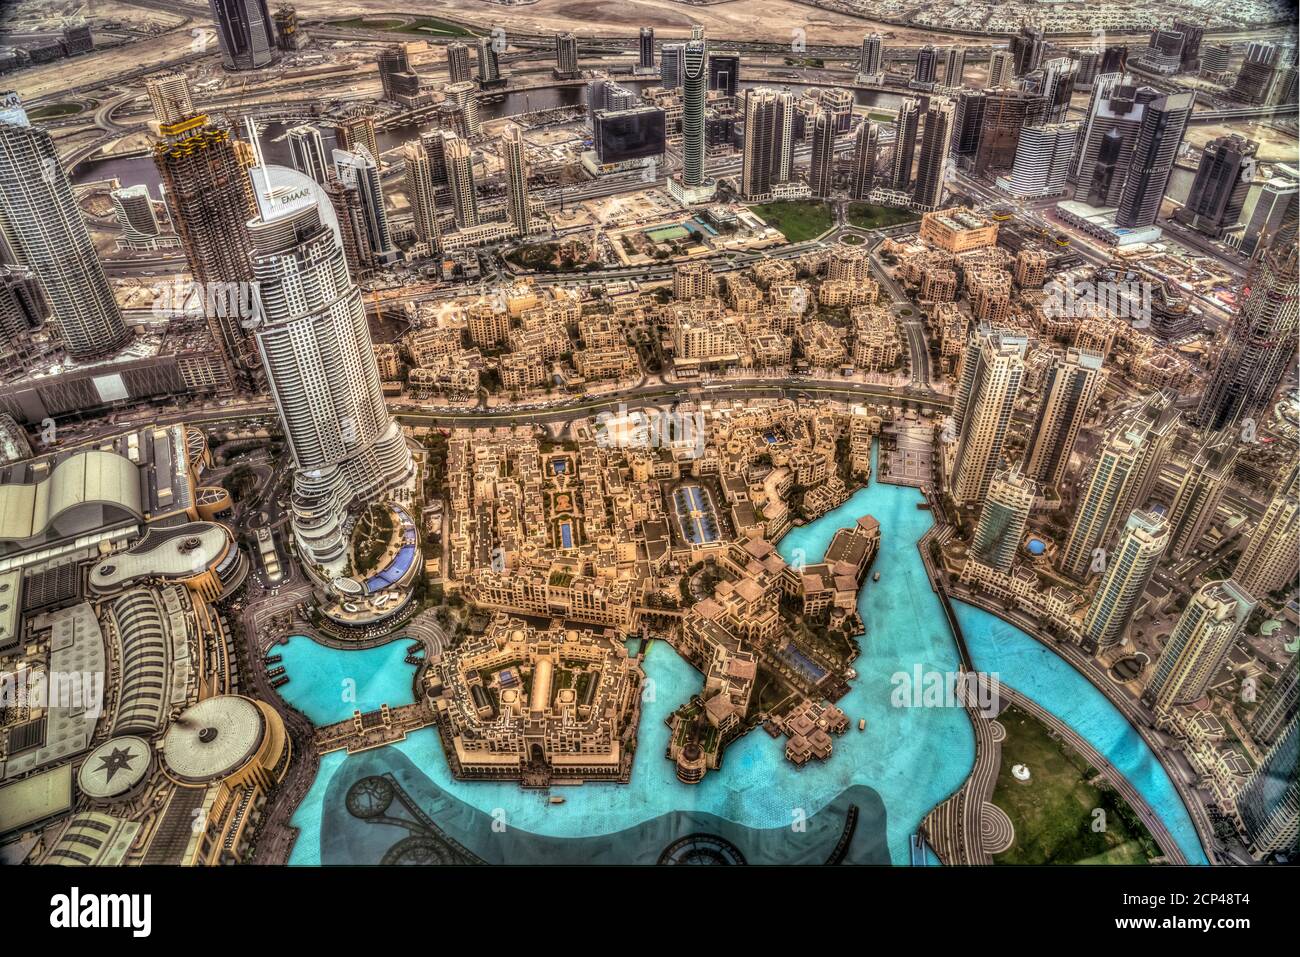 A view of the city skyline from Burj Khalifa in Dubai, UAE, Middle East. Stock Photo